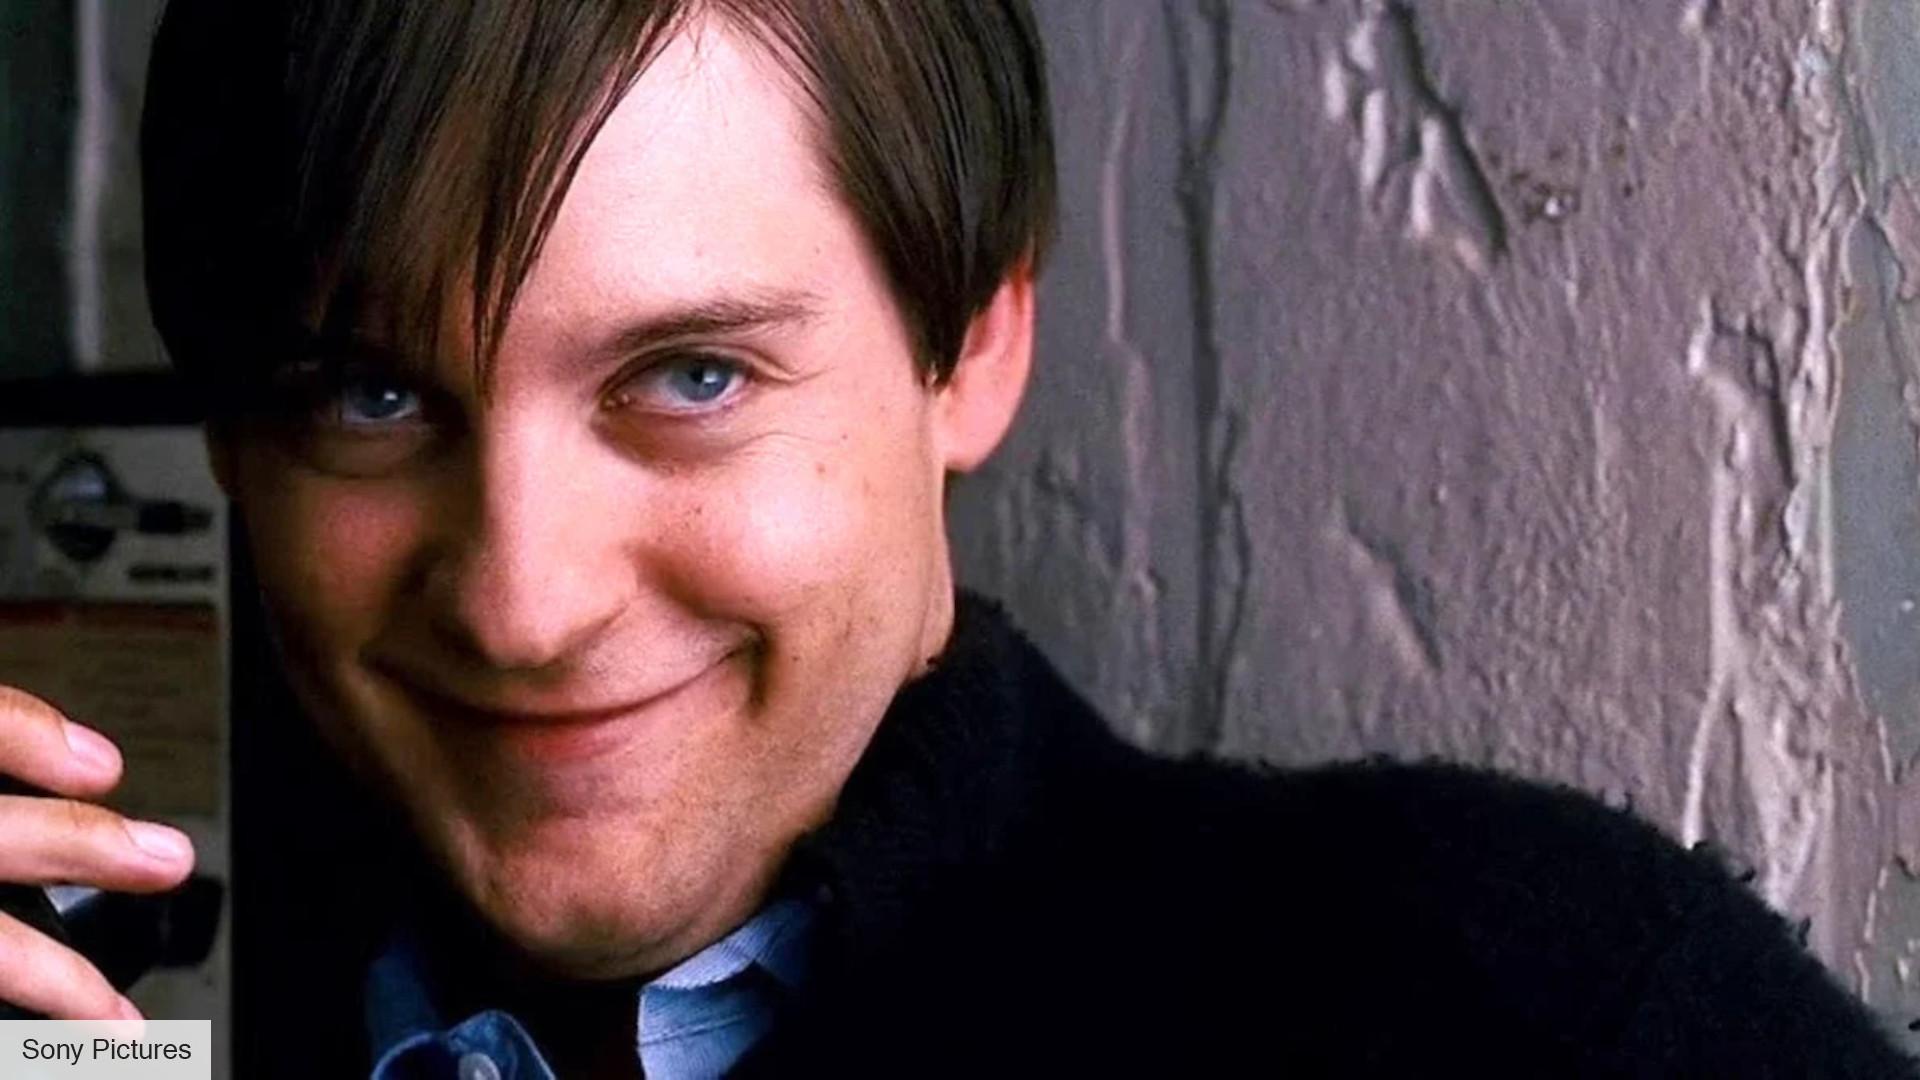 Tobey Maguire enjoys the Bully Maguire Spider-Man memes | The Digital Fix